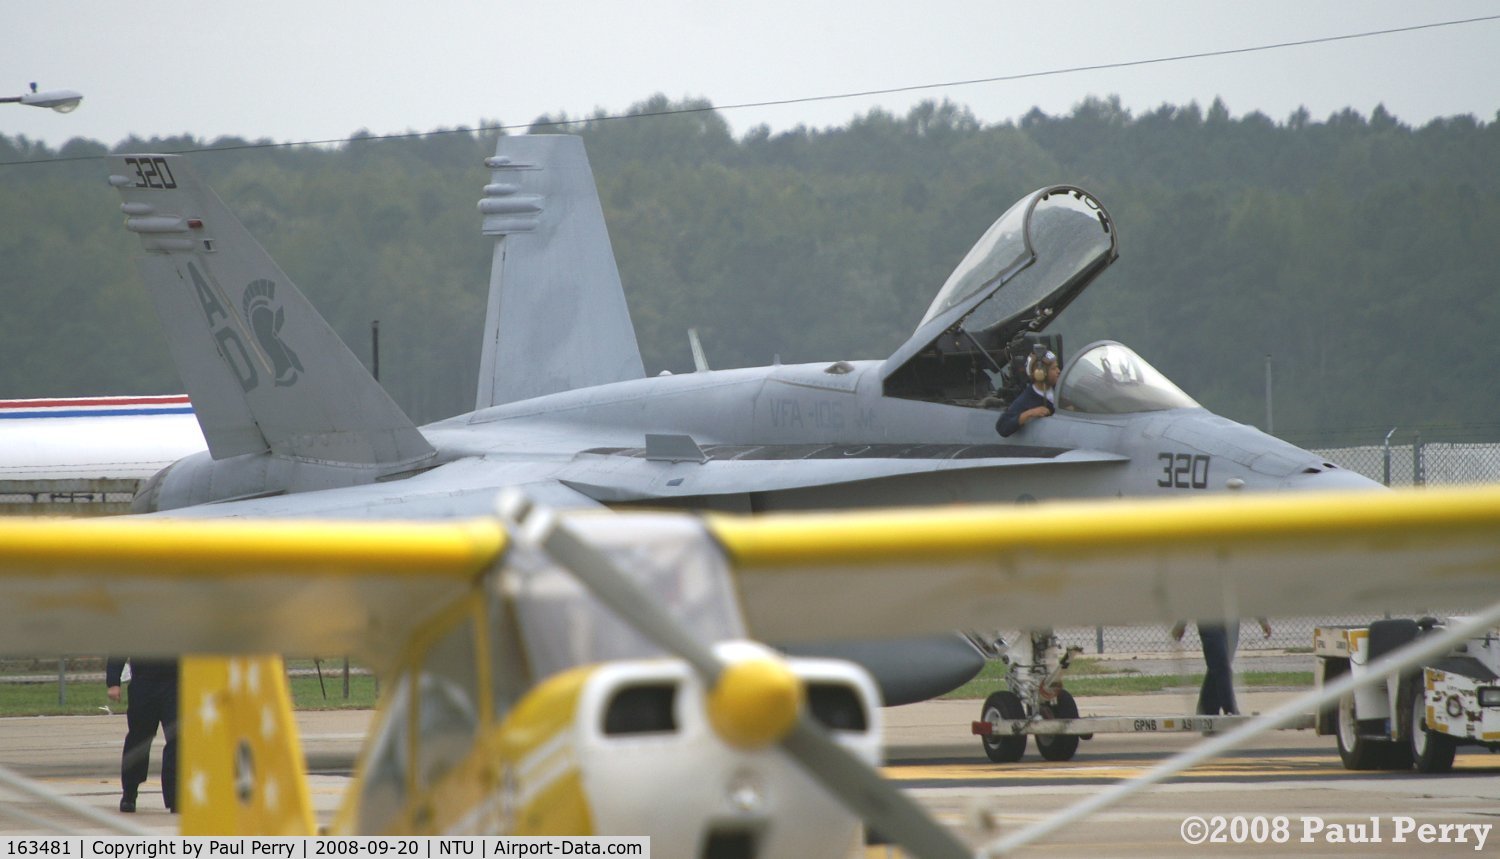 163481, 1988 McDonnell Douglas F/A-18C Hornet C/N 712/C041, Getting towed about